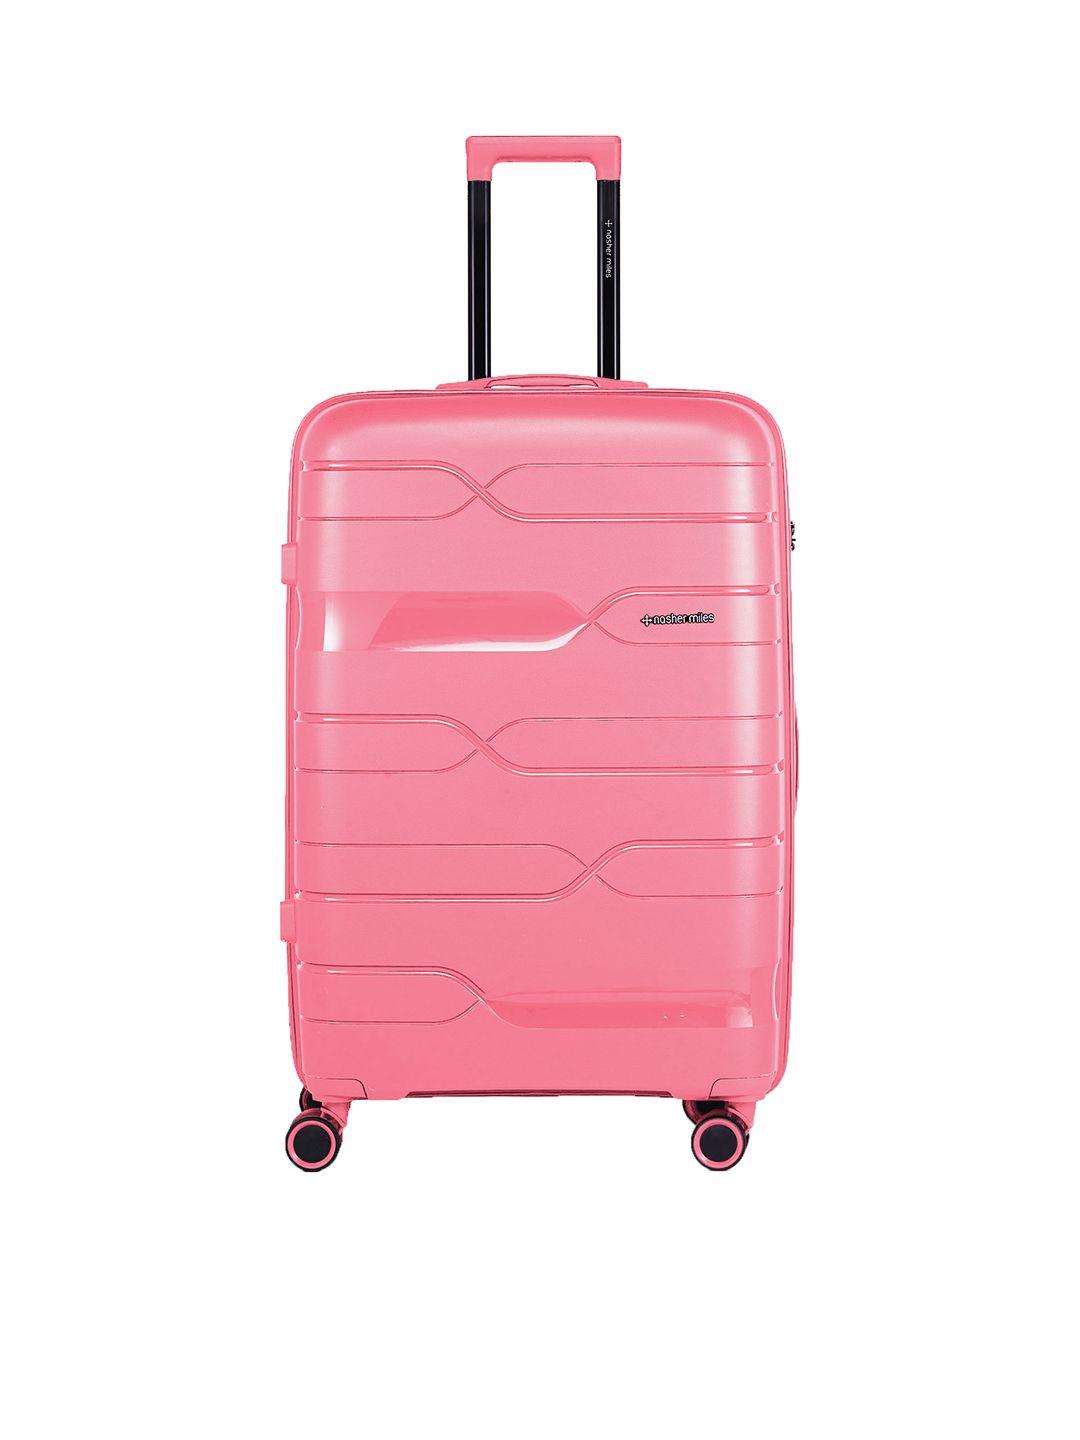 nasher miles paris textured hard-sided large trolley suitcase